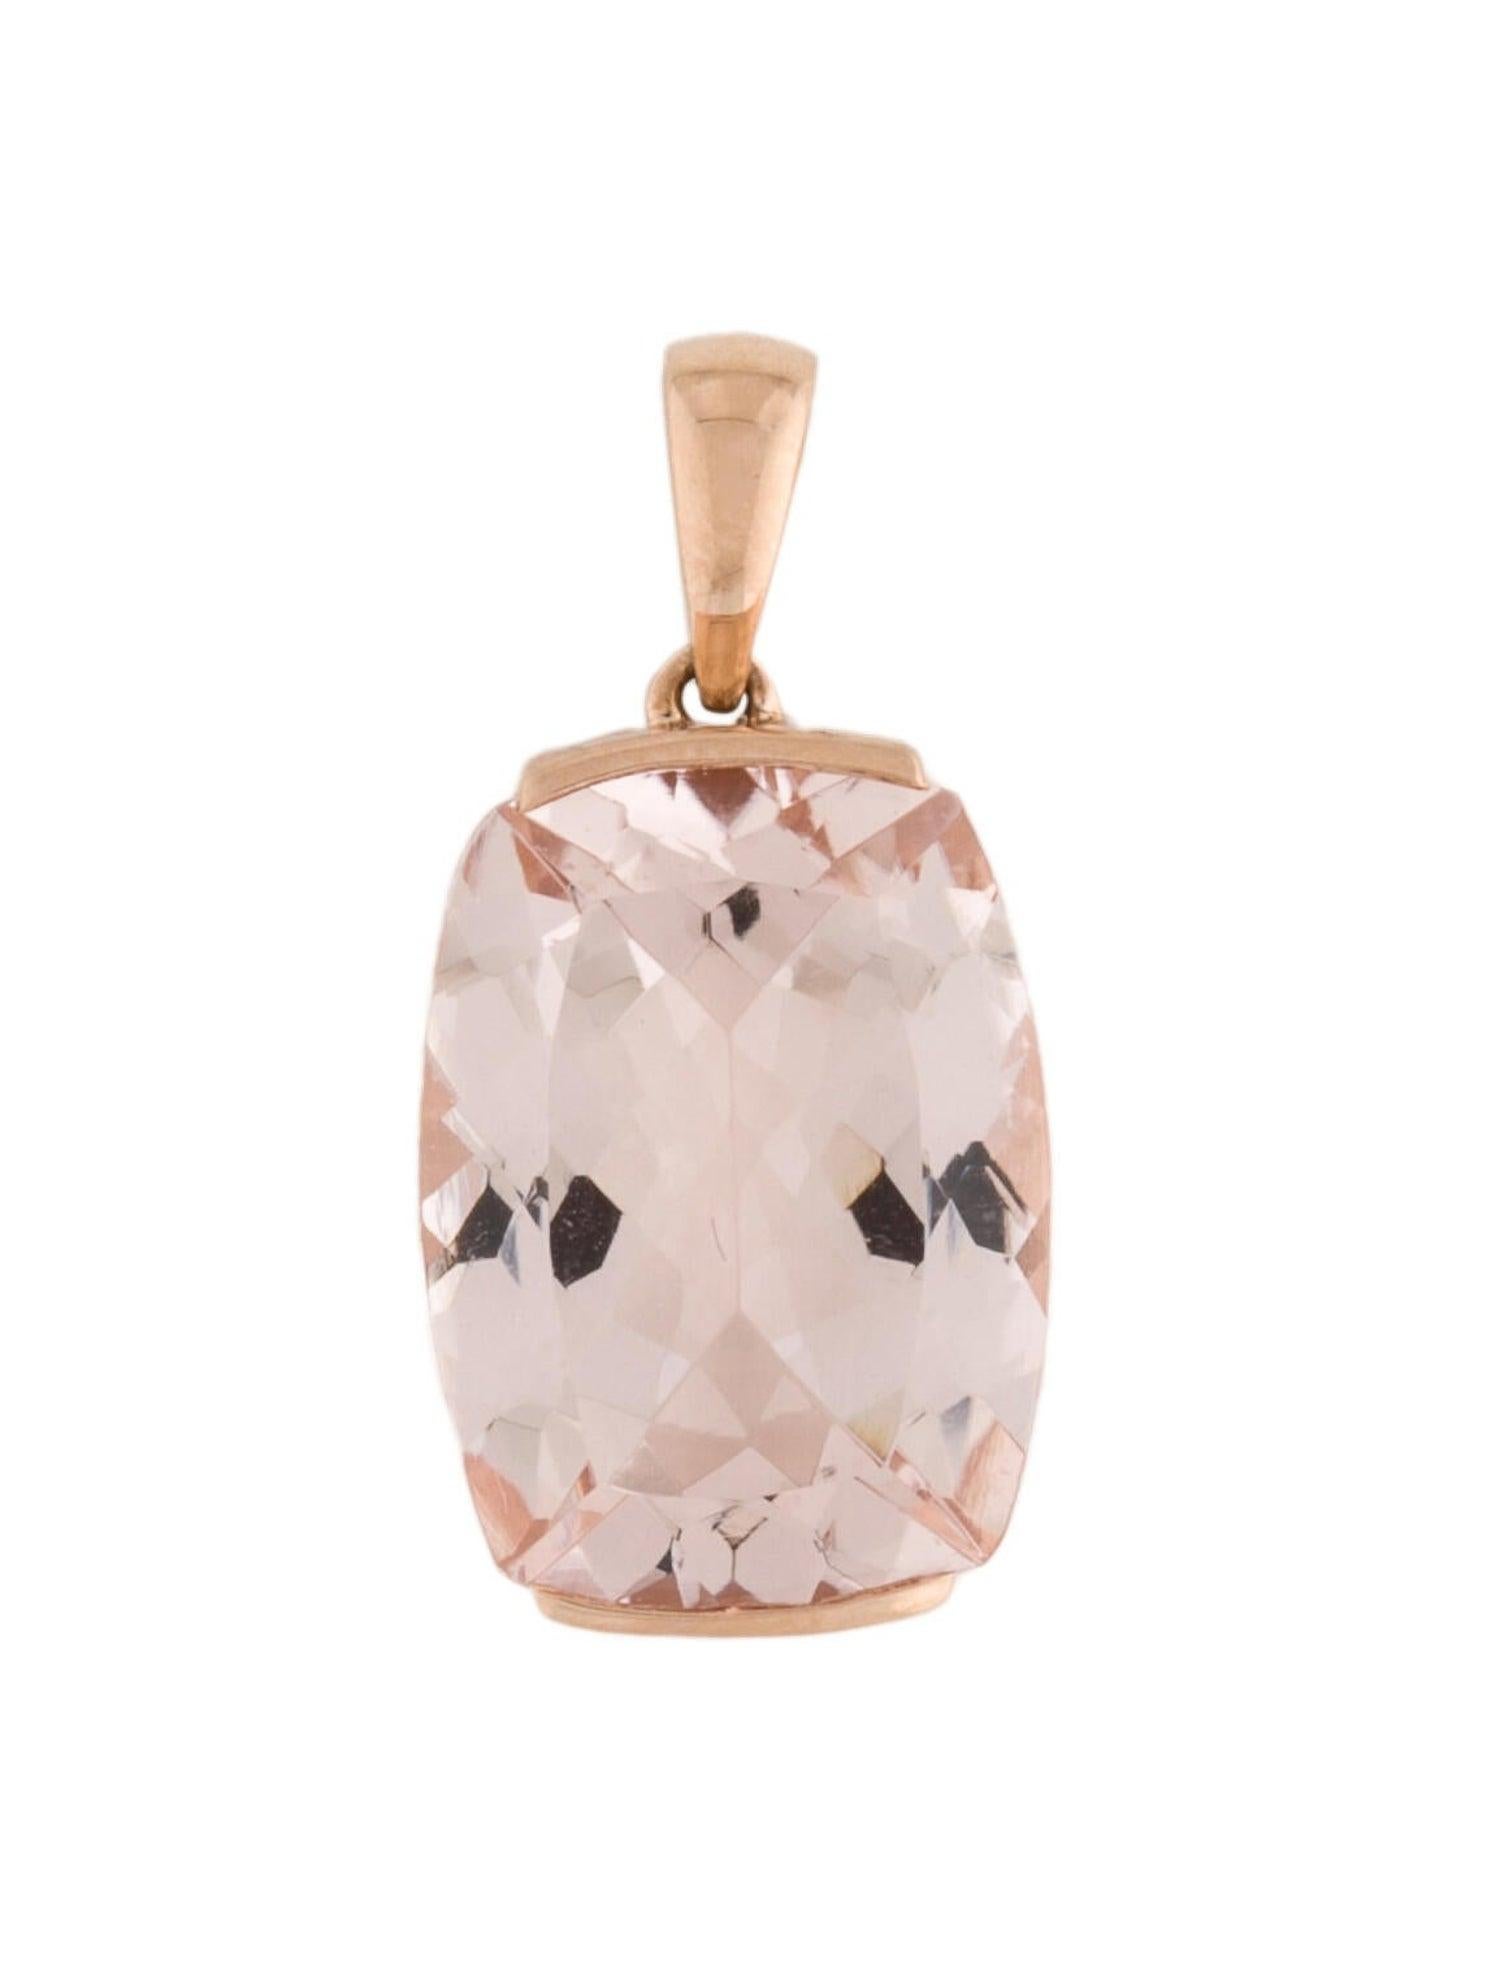 14K 8.86ct Morganite Pendant - Elegant & Timeless Gemstone Statement Piece In New Condition For Sale In Holtsville, NY